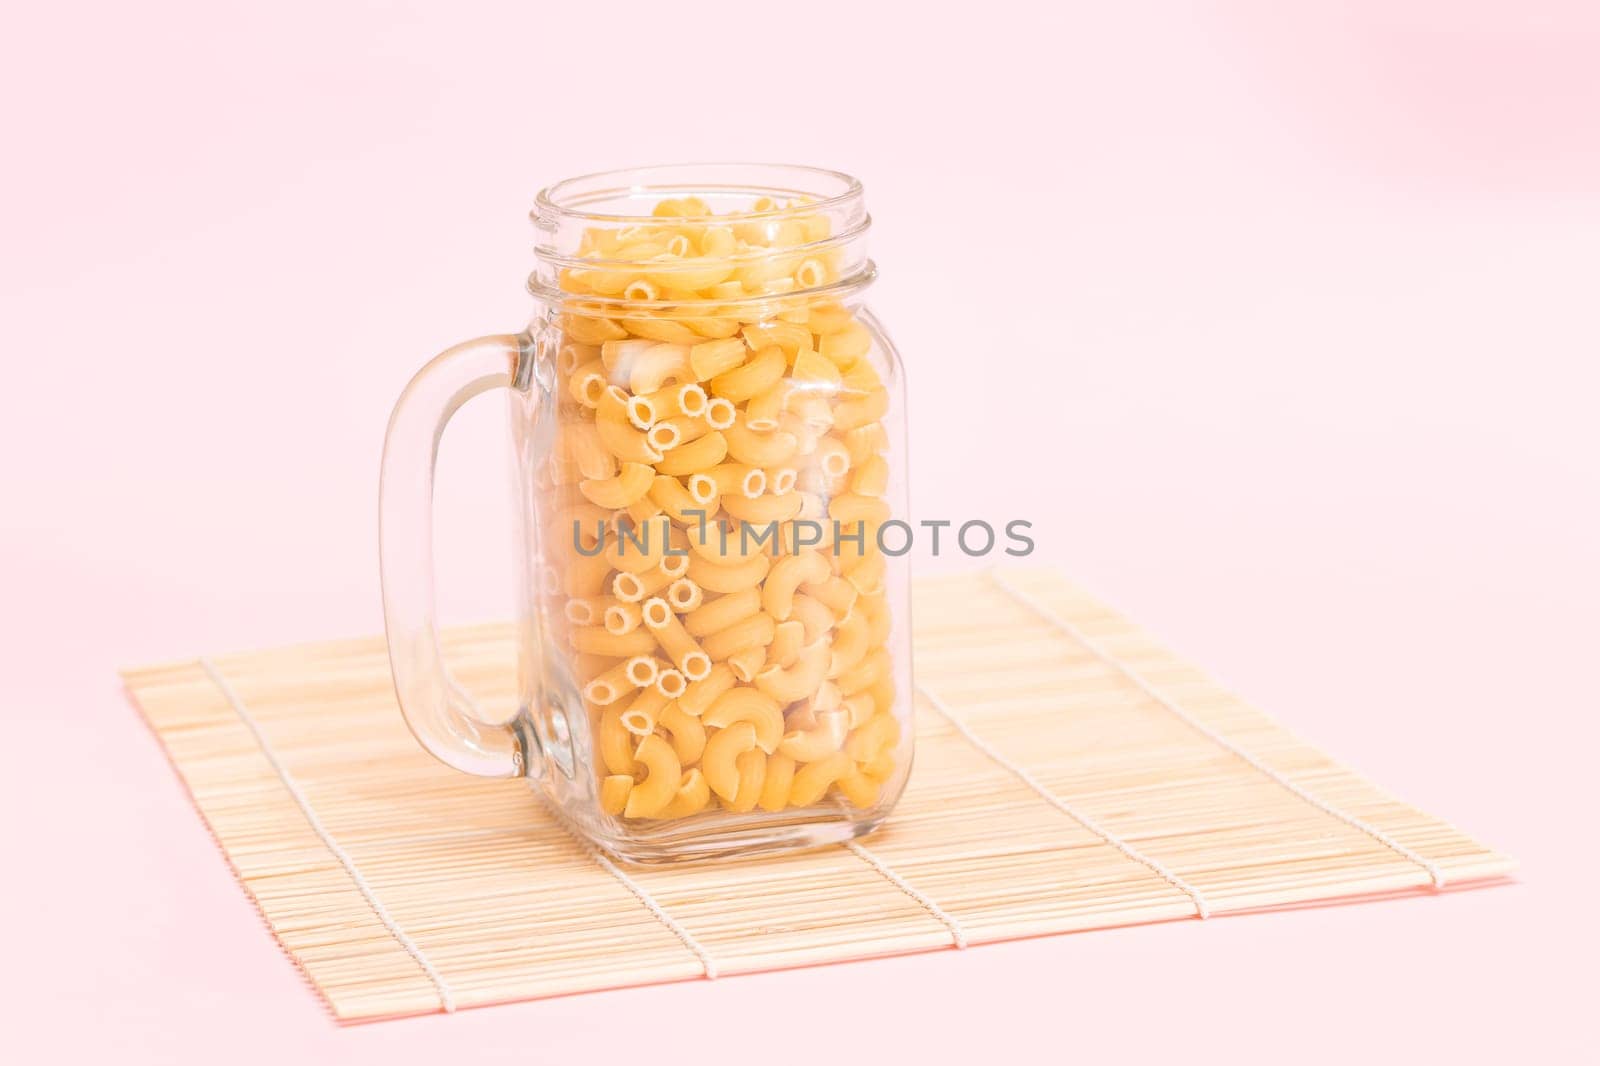 Uncooked Chifferi Rigati Pasta in Glass Jar on Bamboo Mat on Pink Background. Fat and Unhealthy Food. Scattered Classic Dry Macaroni. Italian Culture and Cuisine. Raw Pasta